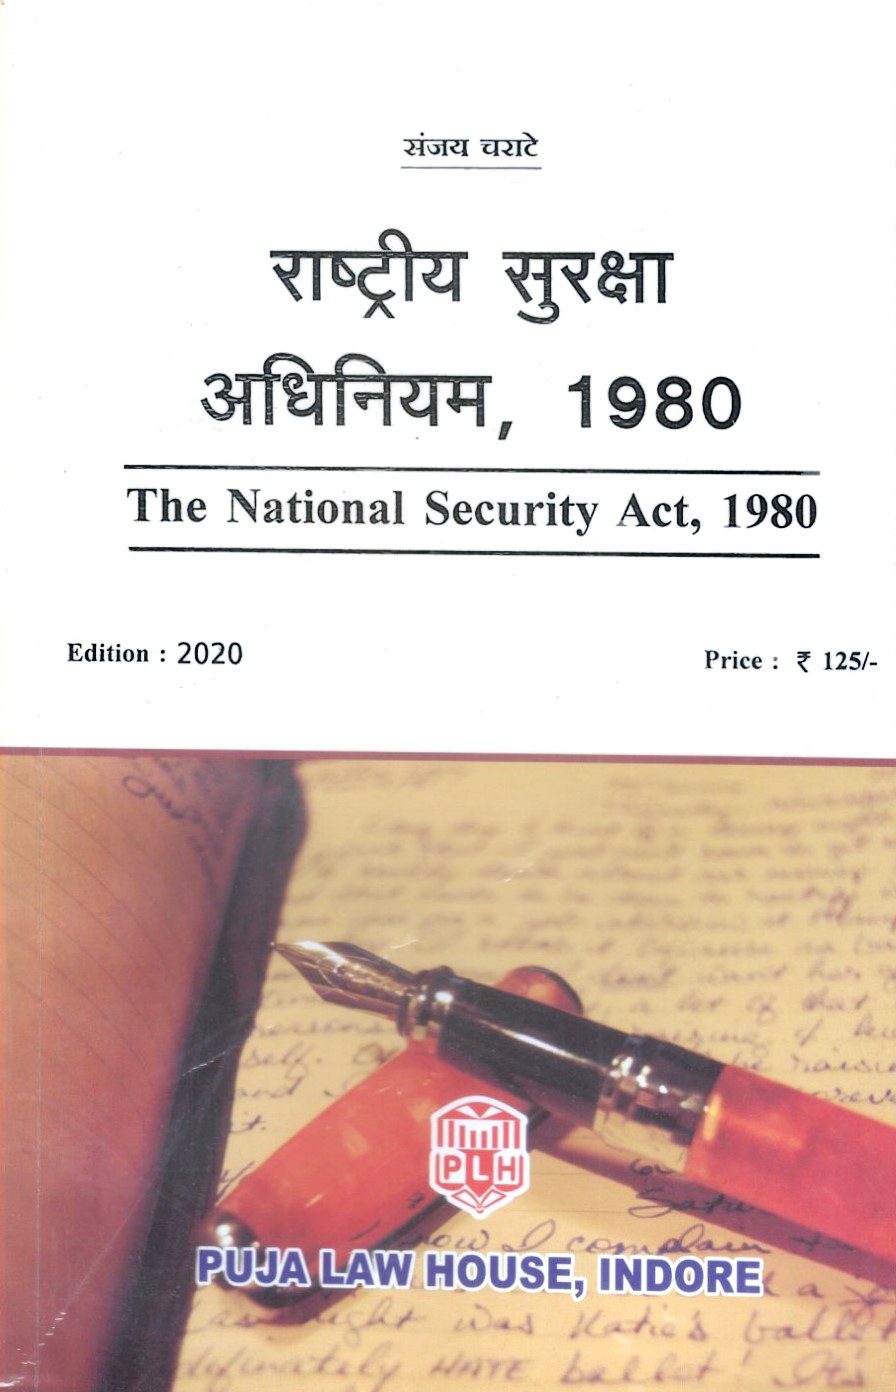 The National Security Act, 1980 / राष्ट्रीय सुरक्षा अधिनियम, 1980